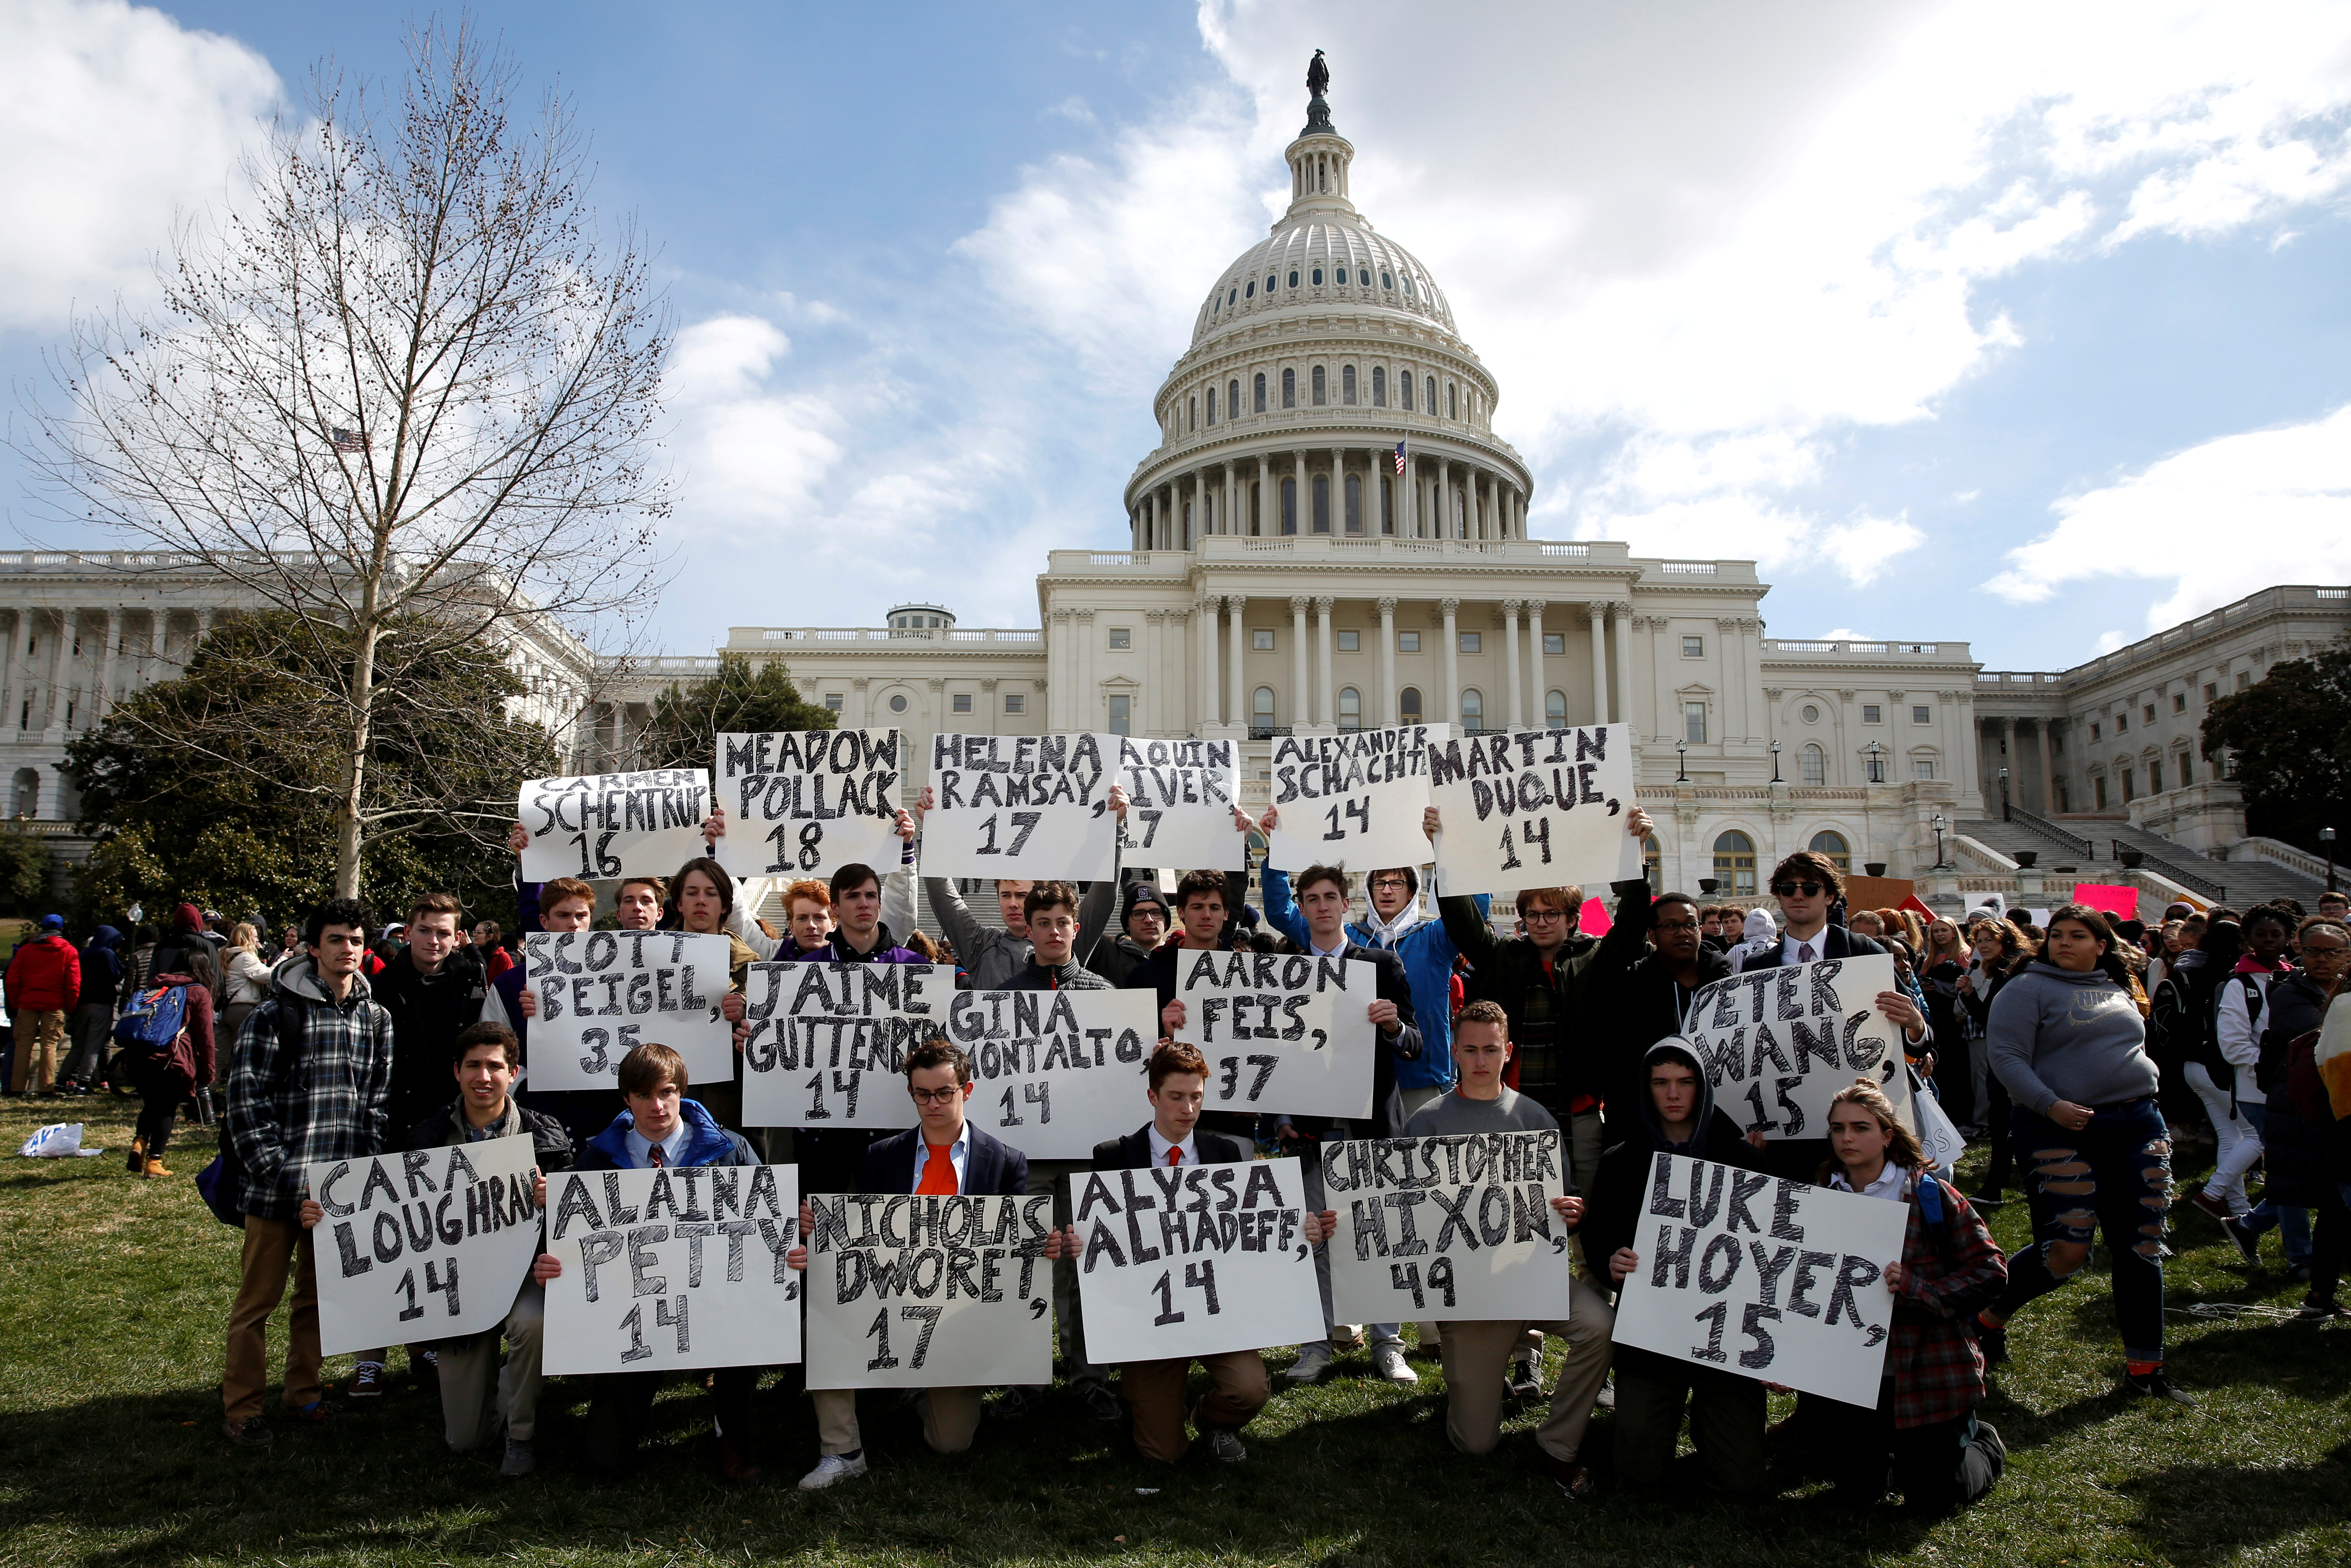 Students from Gonzaga College High School in Washington, DC, hold up signs with the names of those killed in the Parkland, Florida, school shooting during a protest for stricter gun control during a walkout by students at the U.S. Capitol in Washington, U.S., March 14, 2018. REUTERS/Joshua Roberts